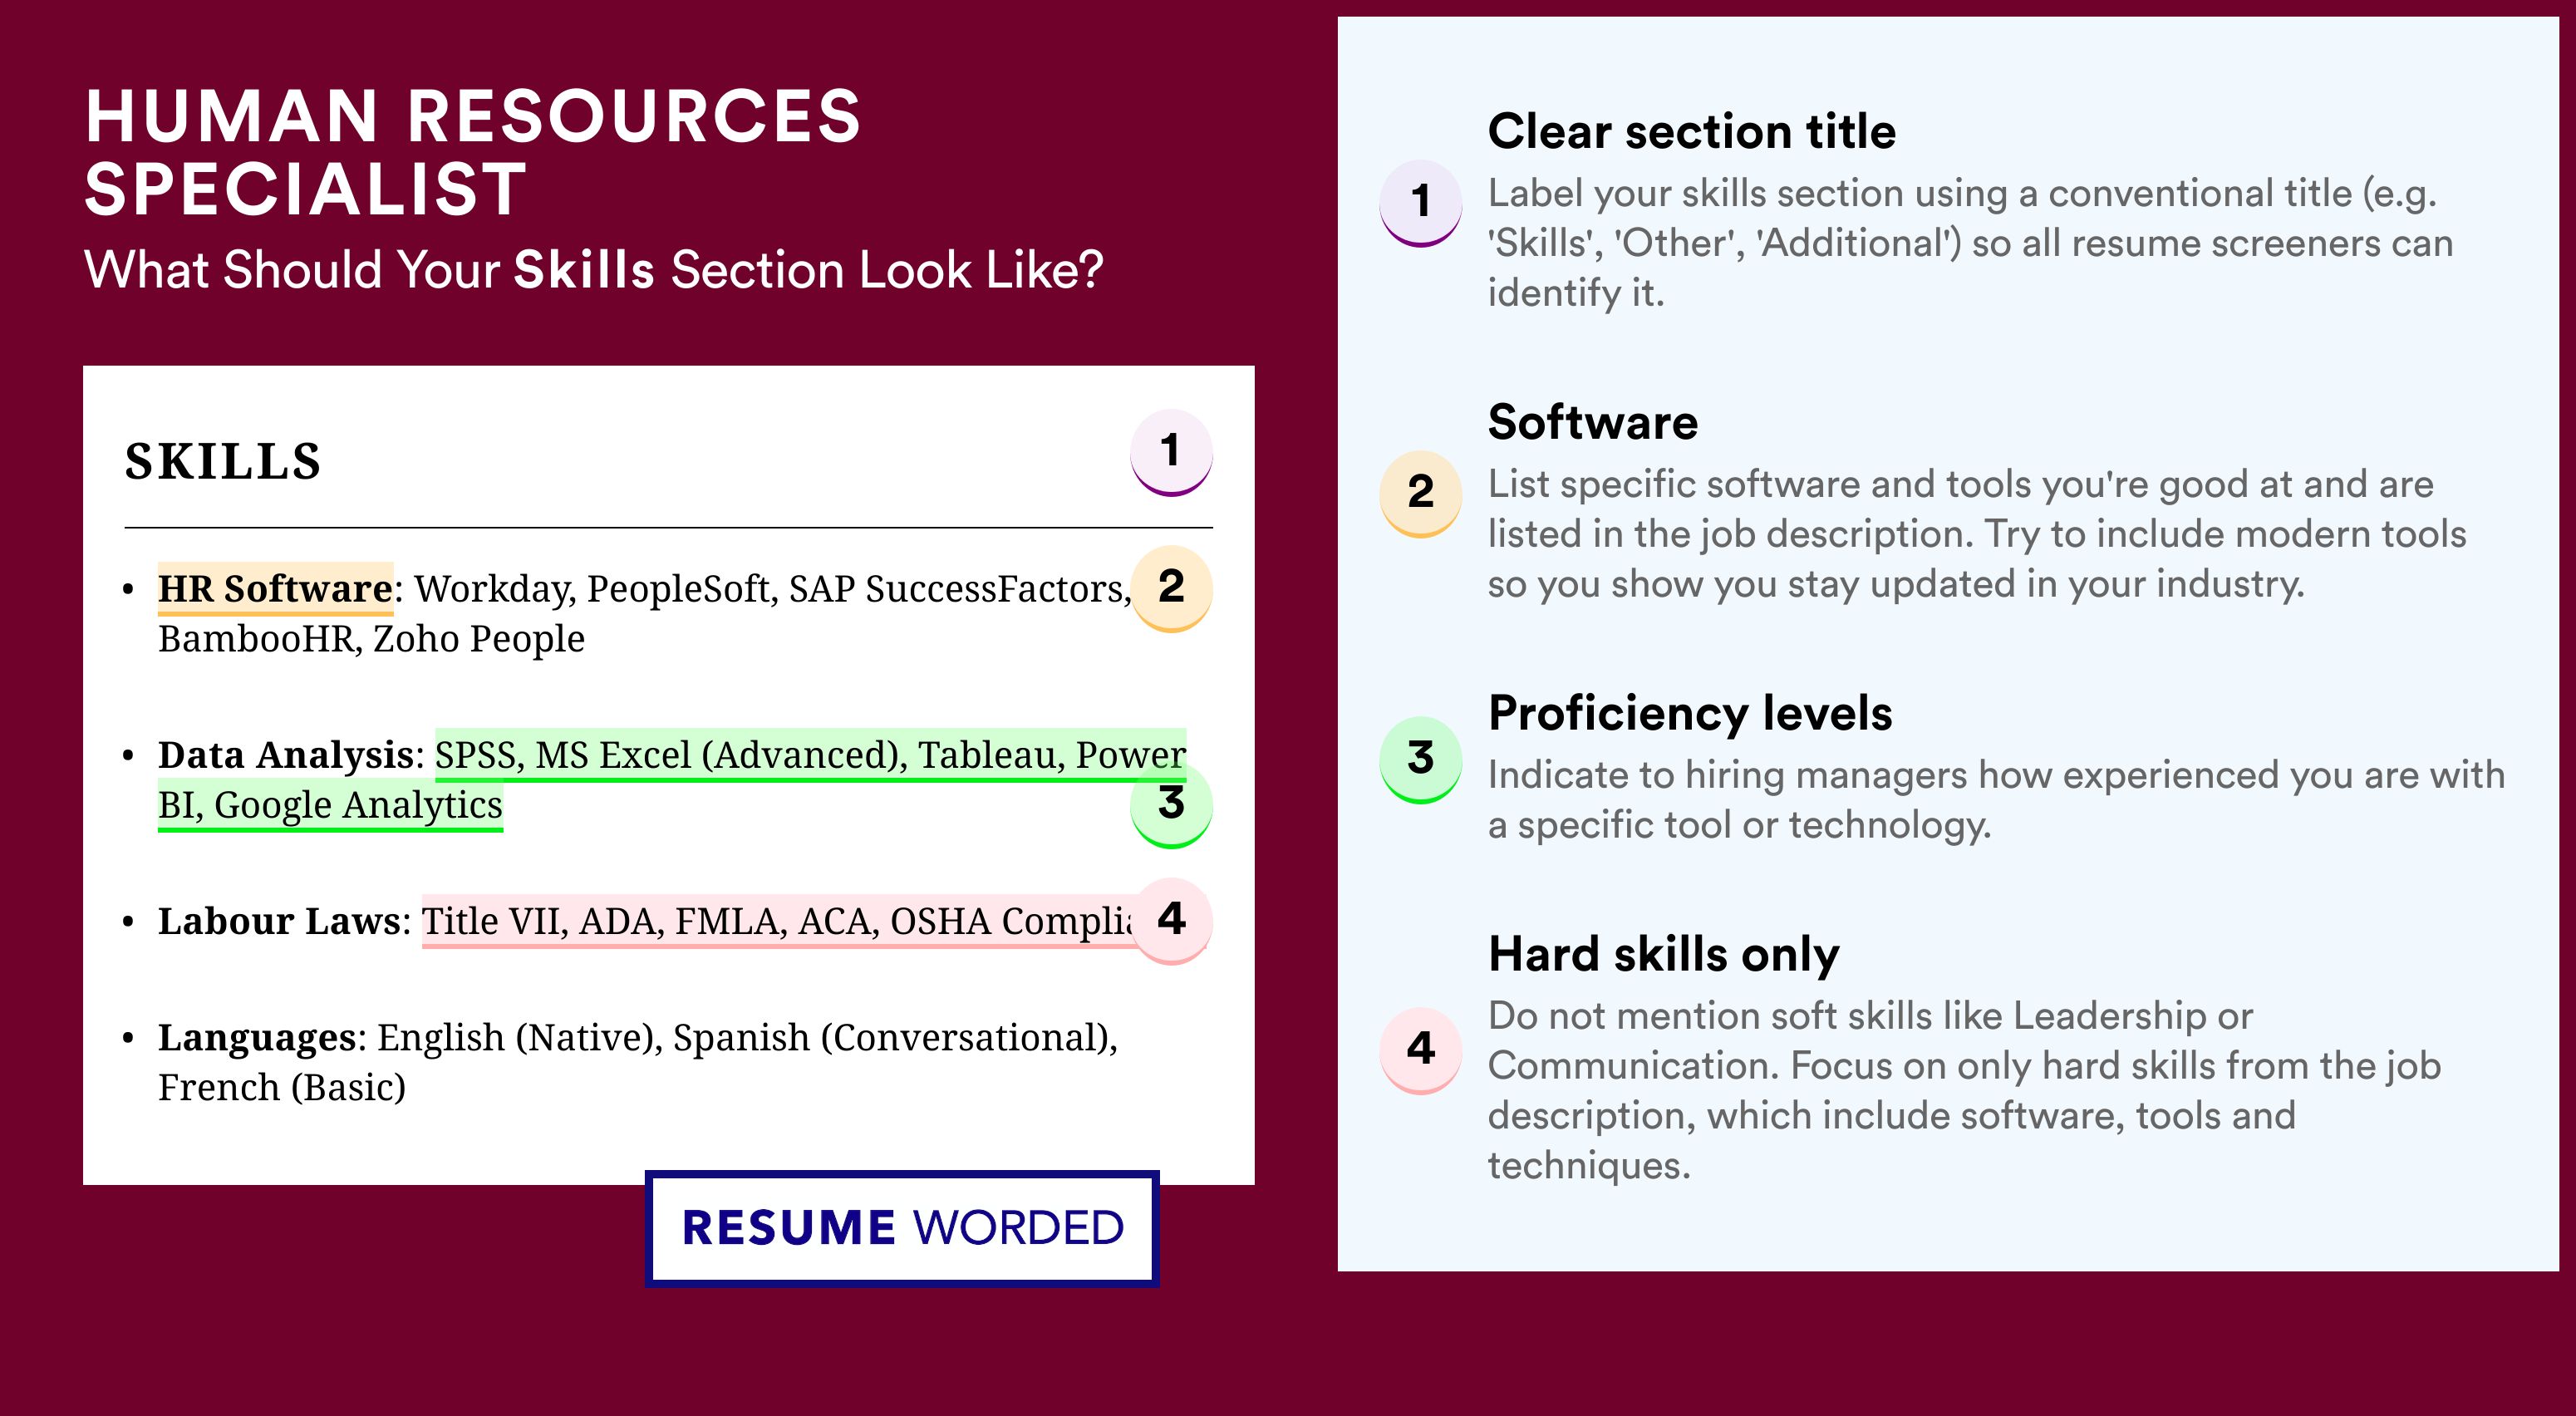 How To Write Your Skills Section - Human Resources Specialist Roles